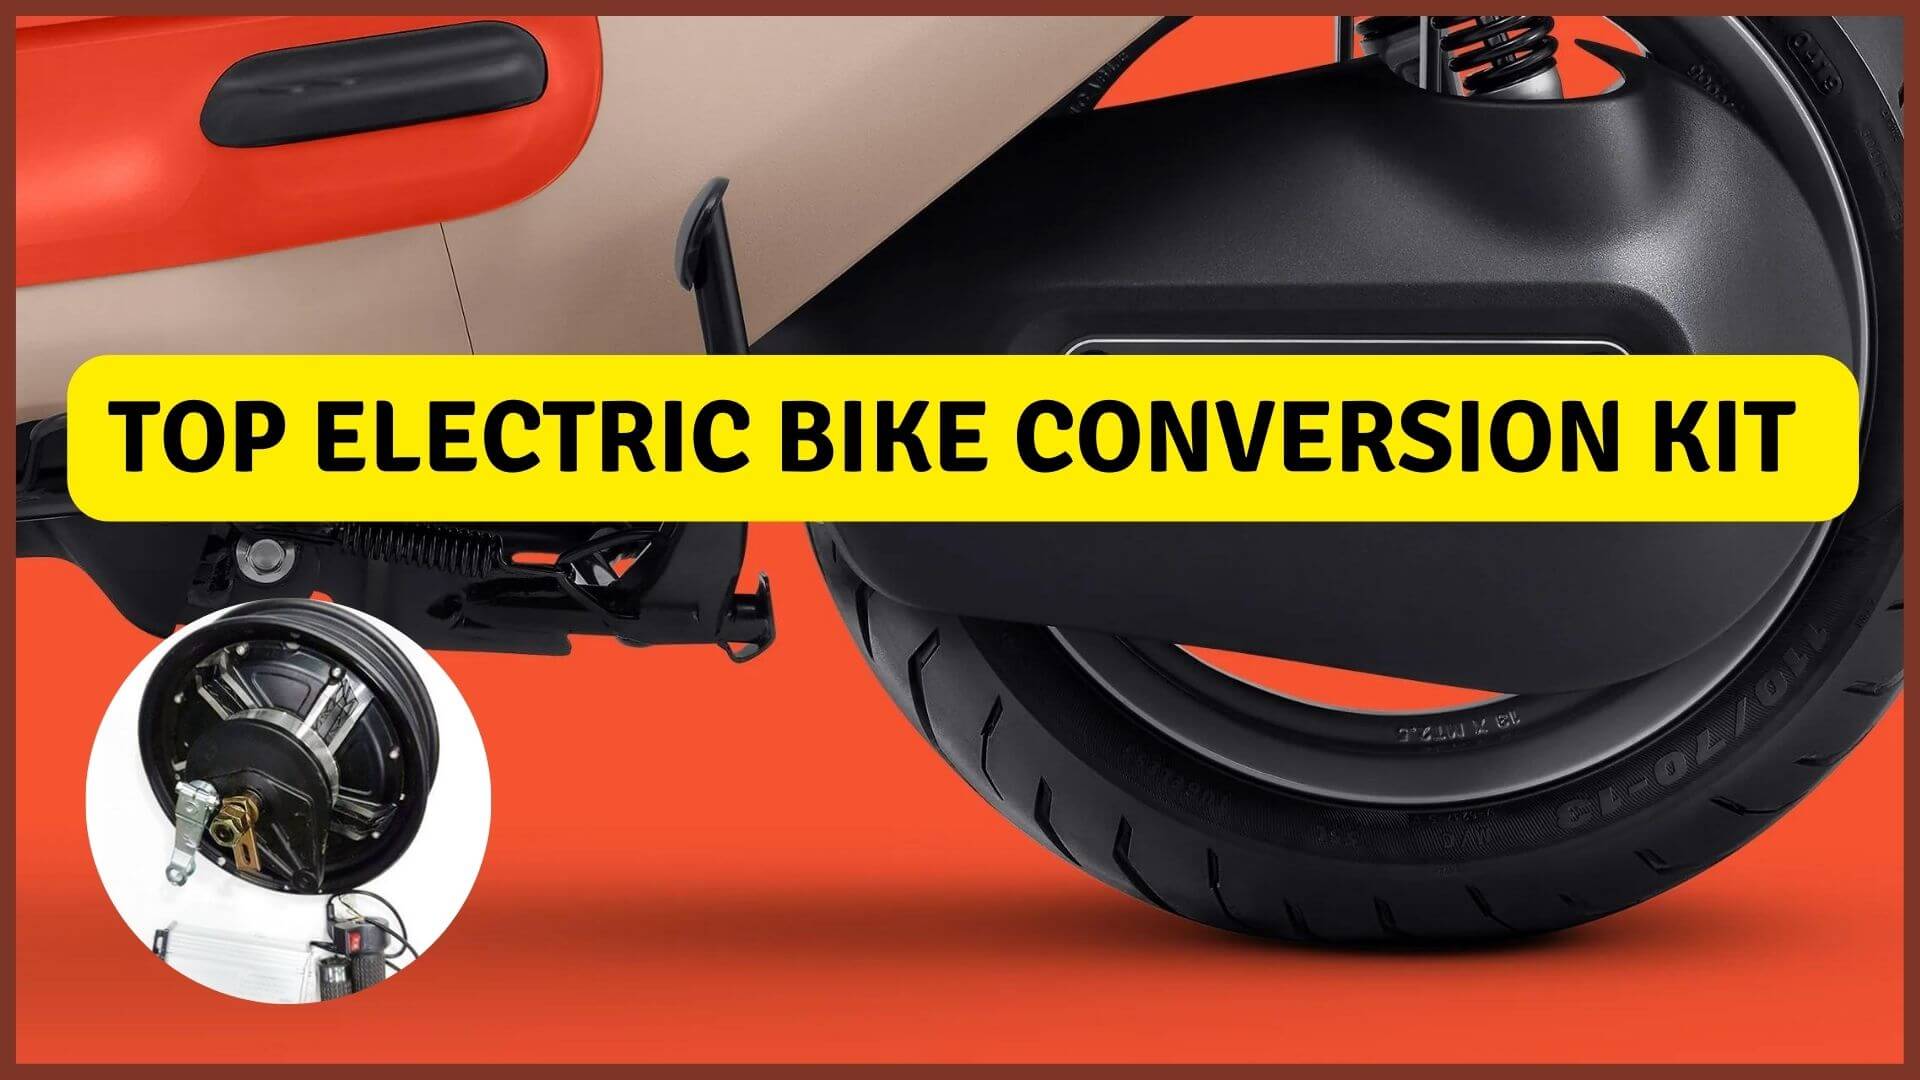 https://e-vehicleinfo.com/electric-bike-conversion-kit-with-battery-price-and-manufacturers/